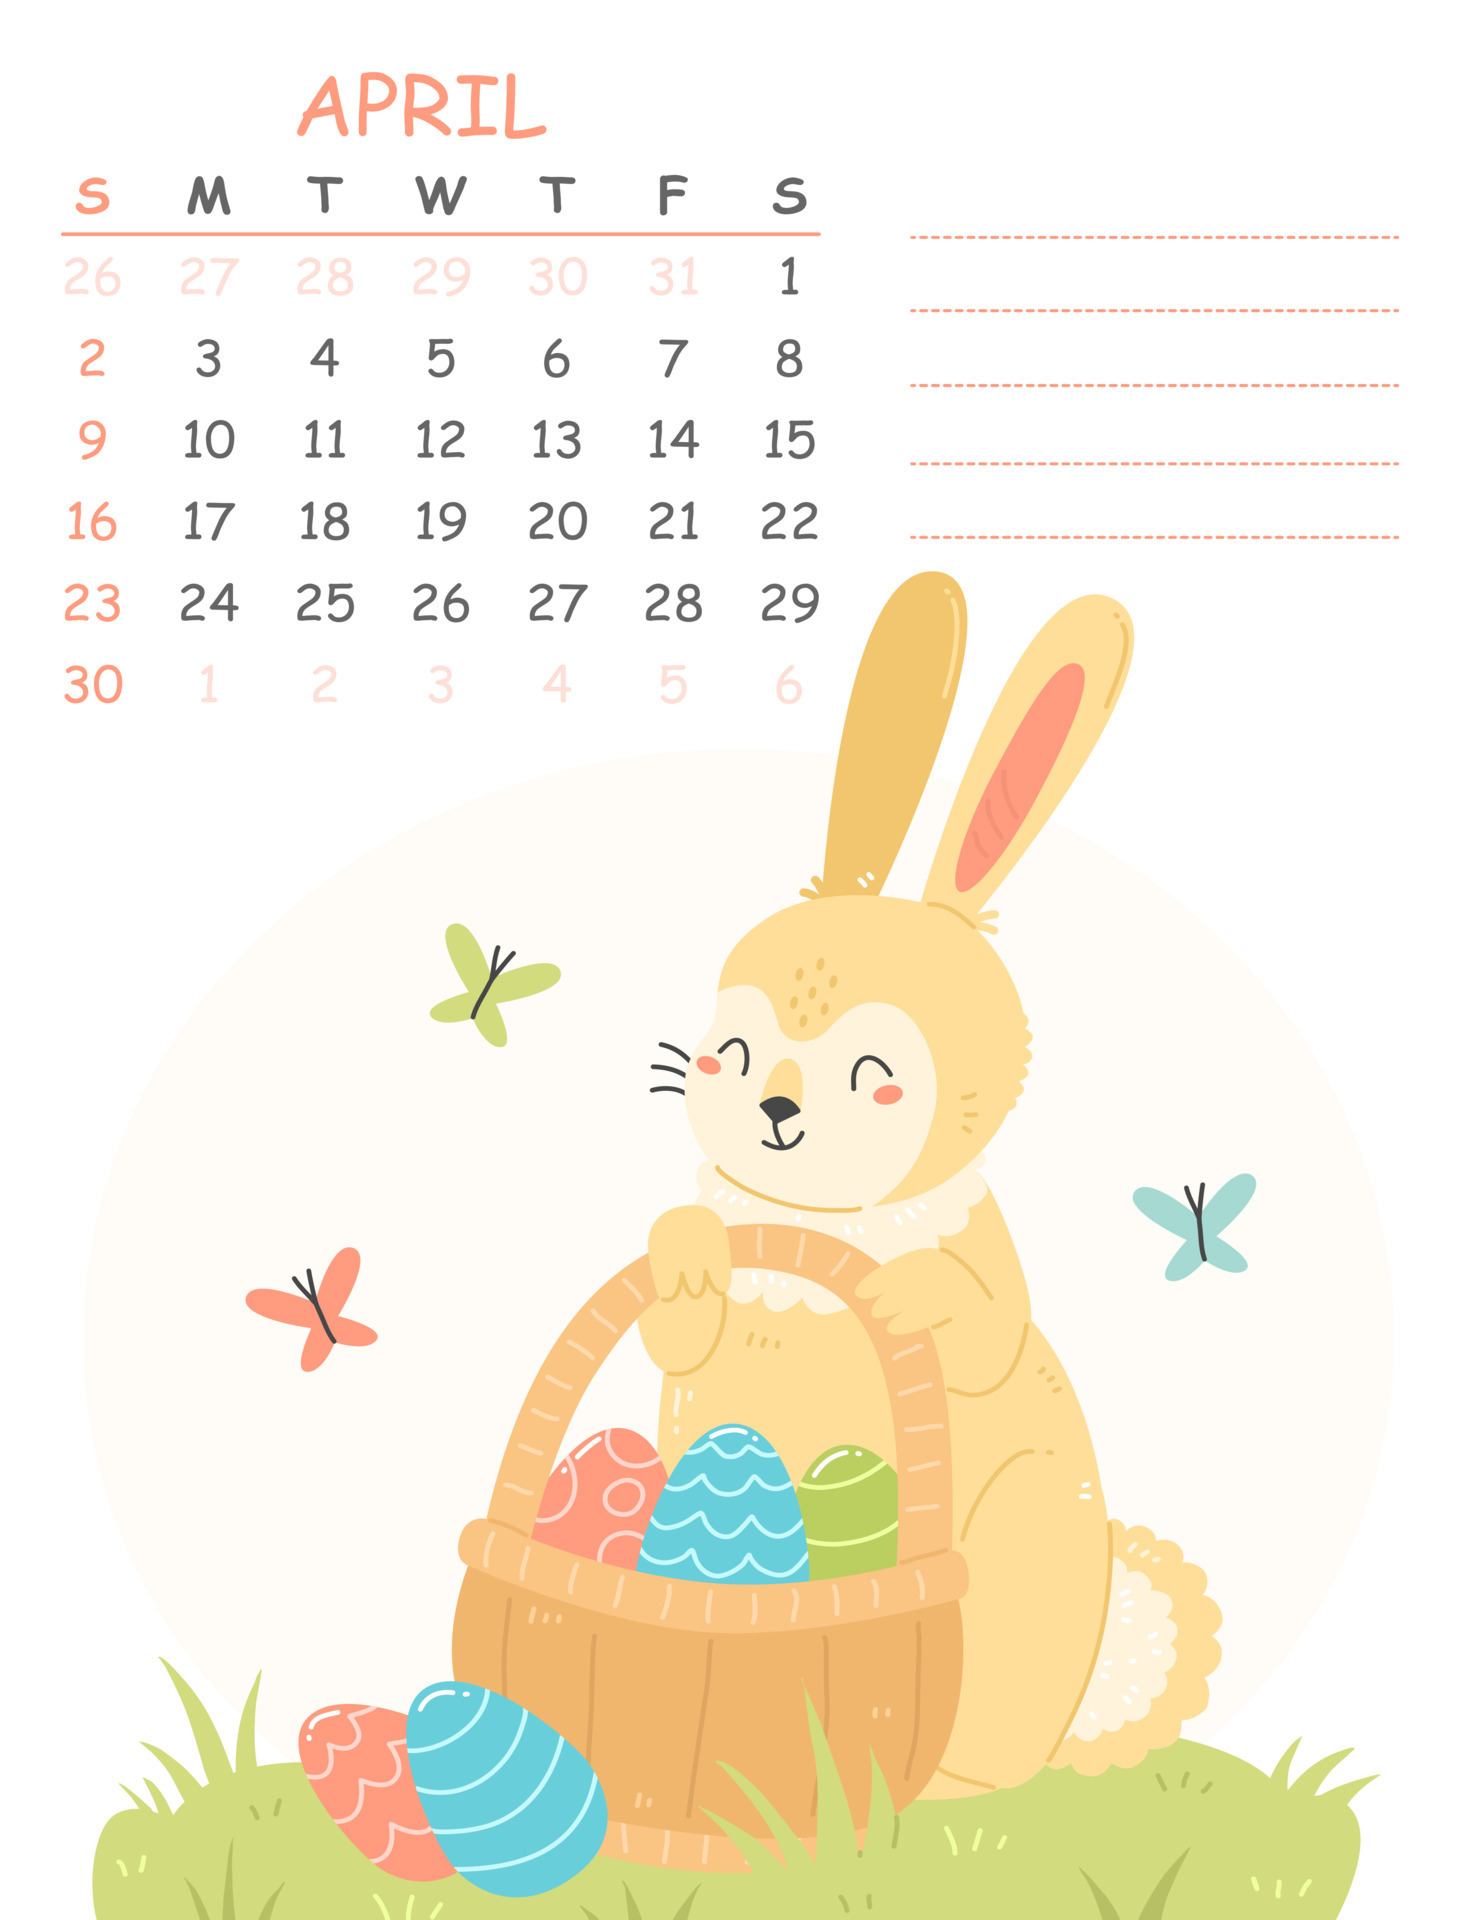 April children's vertical calendar for 2023 with an illustration of a